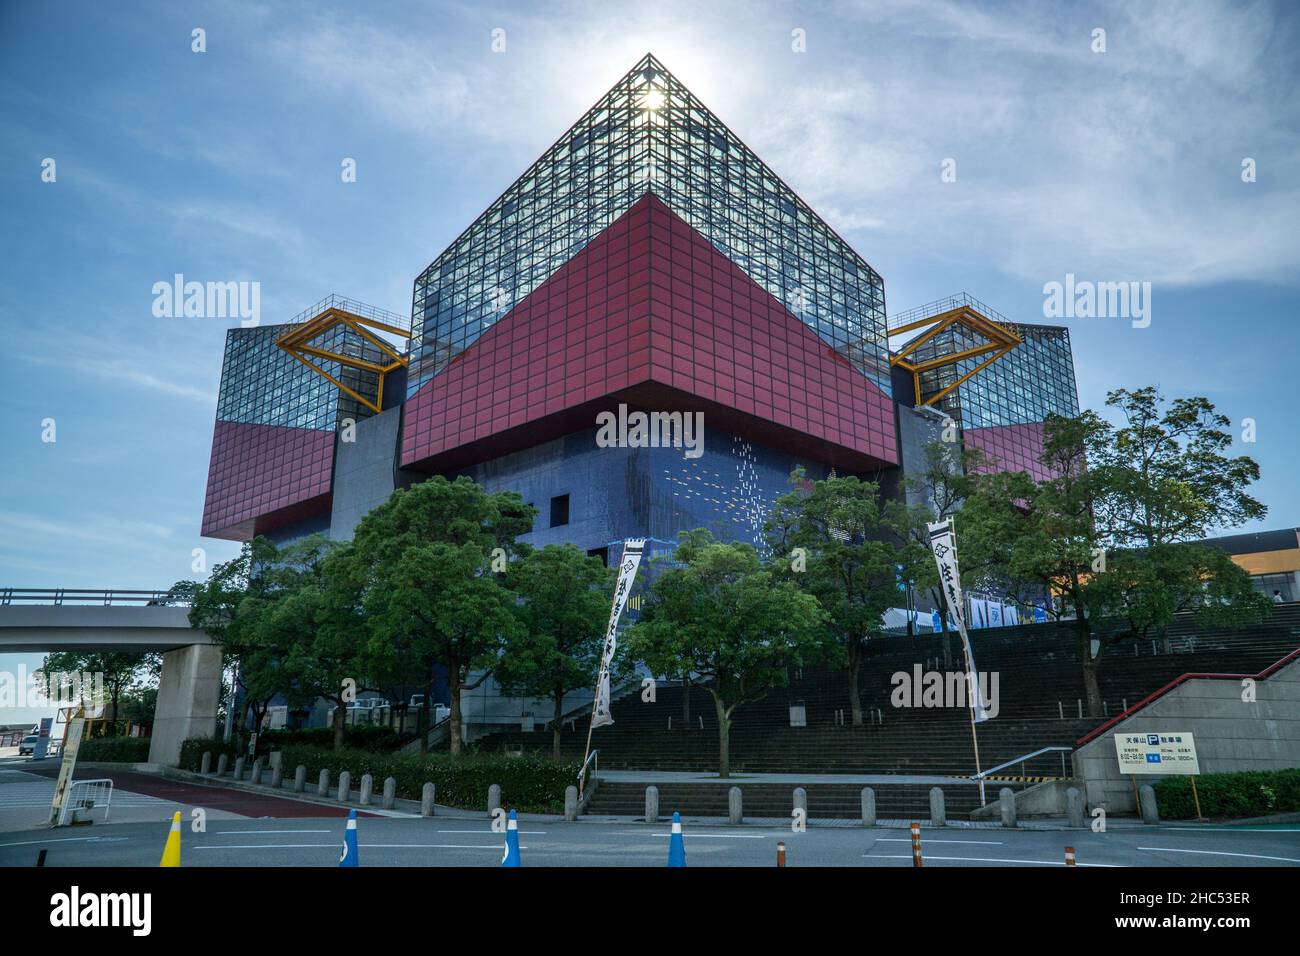 Osaka, Japan - July 13, 2017: Osaka Aquarium Kaiyukan in the afternoon when the sun is directly above the building and no one is around Stock Photo